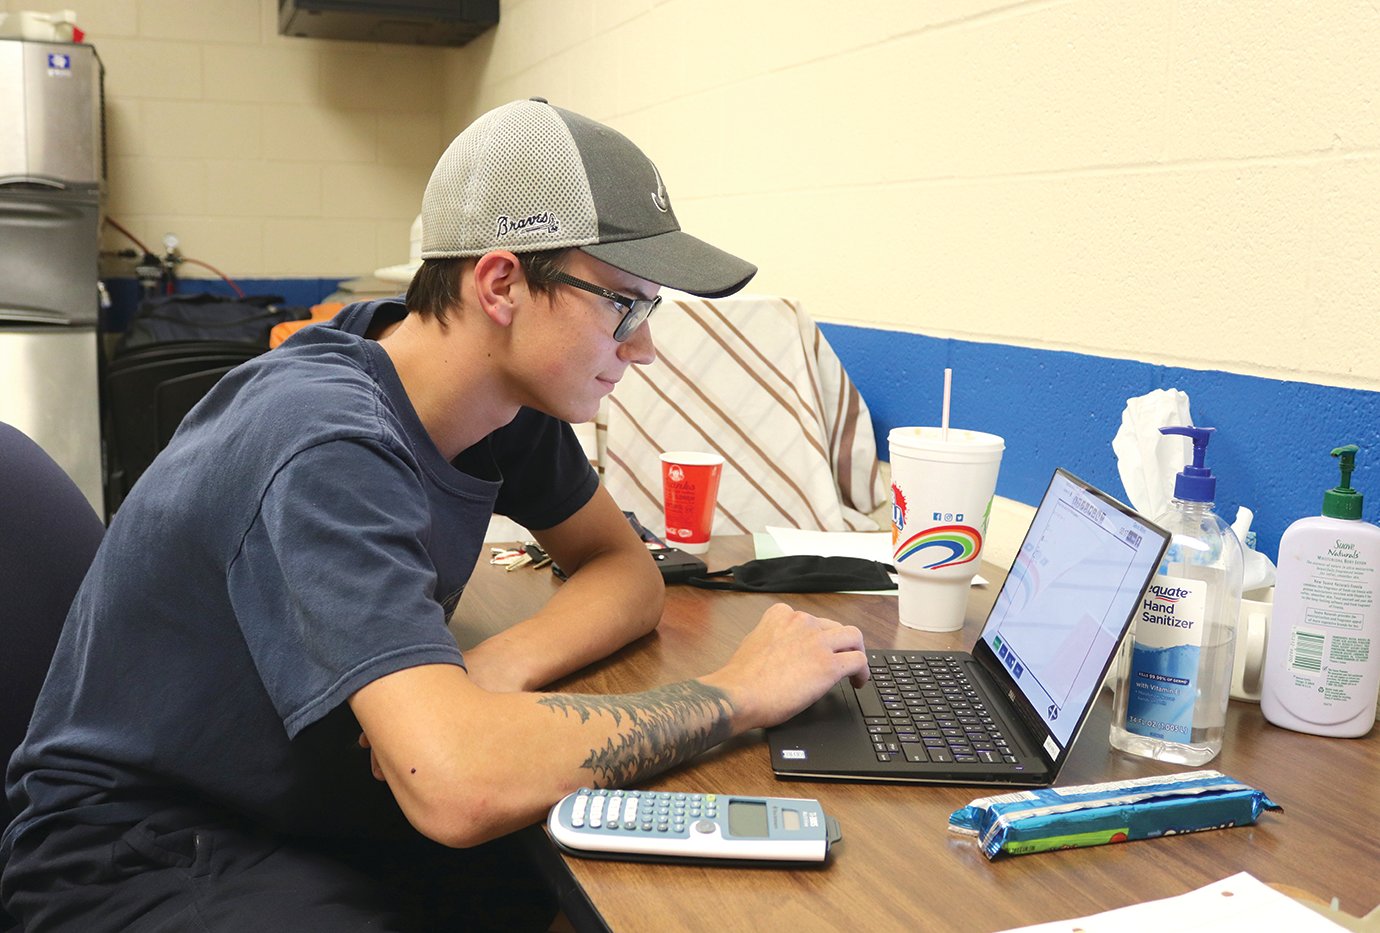 Gavin Winn, 18, who lives in Anderson but grew up in Crawfordsville, studies Tuesday for his High School Equivalency diploma at the Crawfordsville Adult Resource Academy.